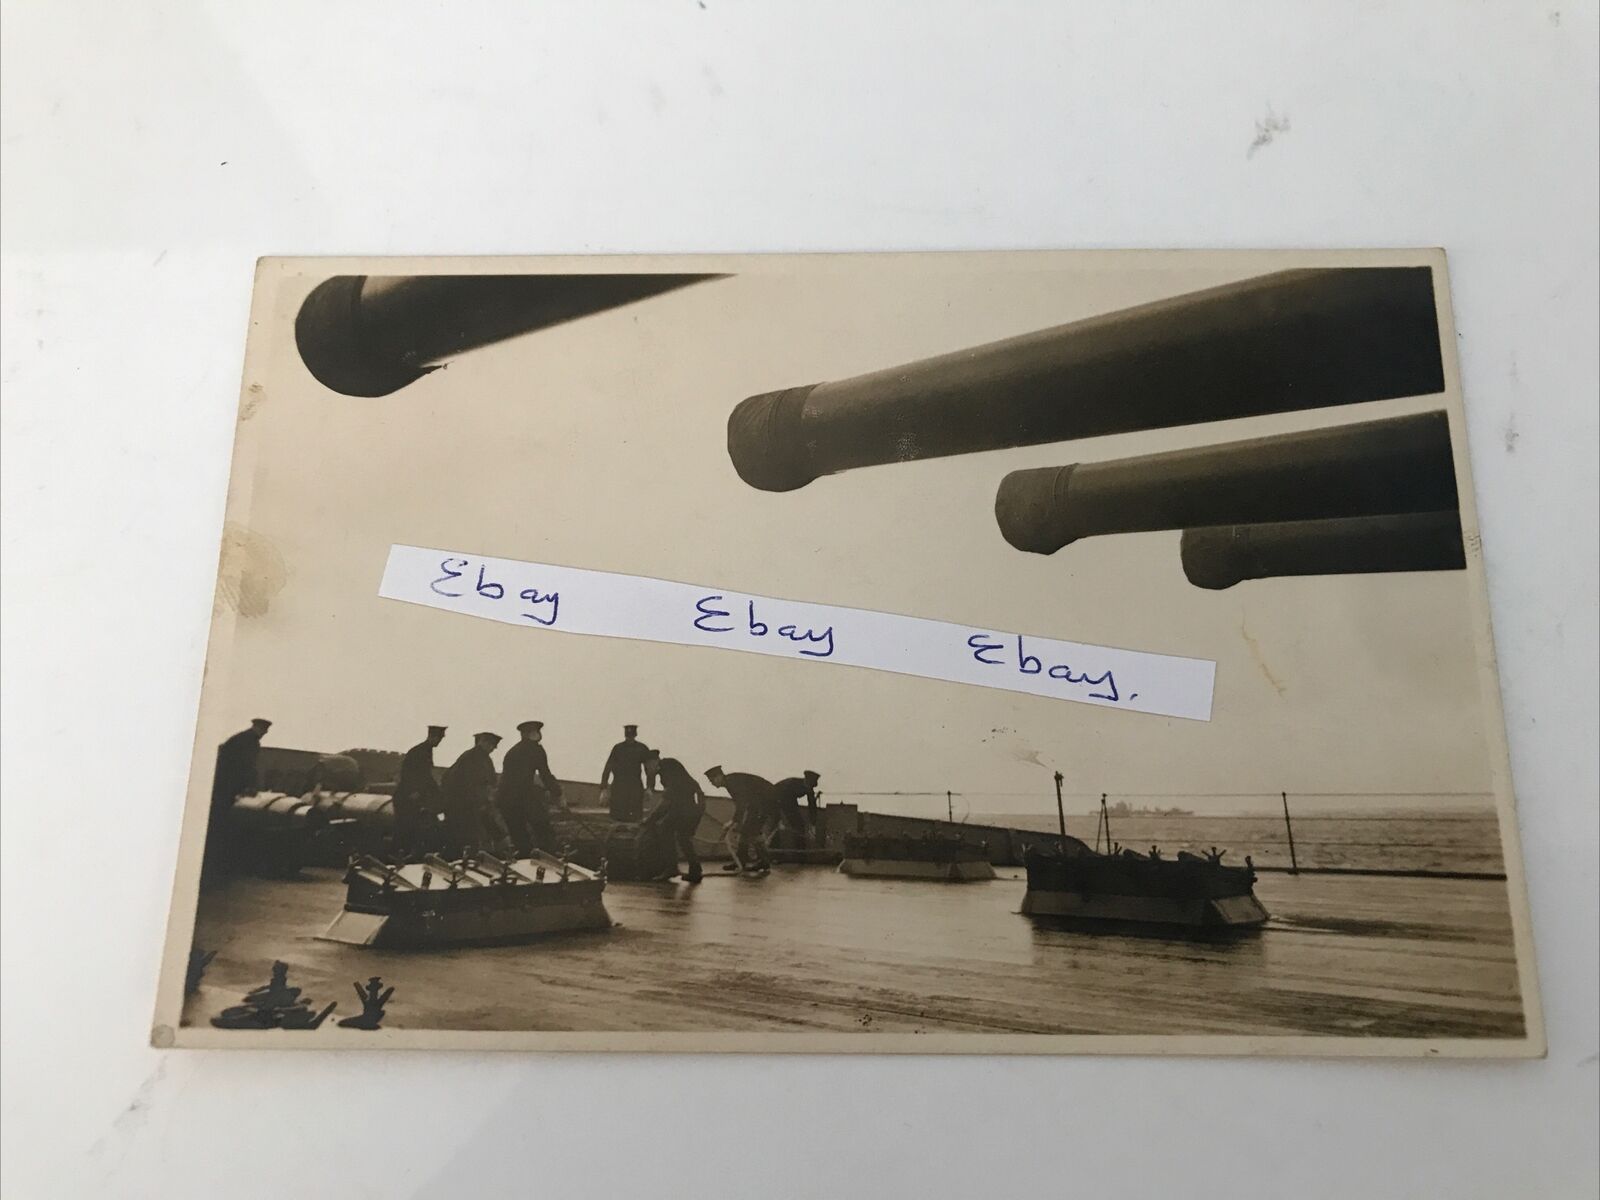 WW2 HMS Duke of York Photo Foredeck Sailors with Rope Artic Convoy Duties